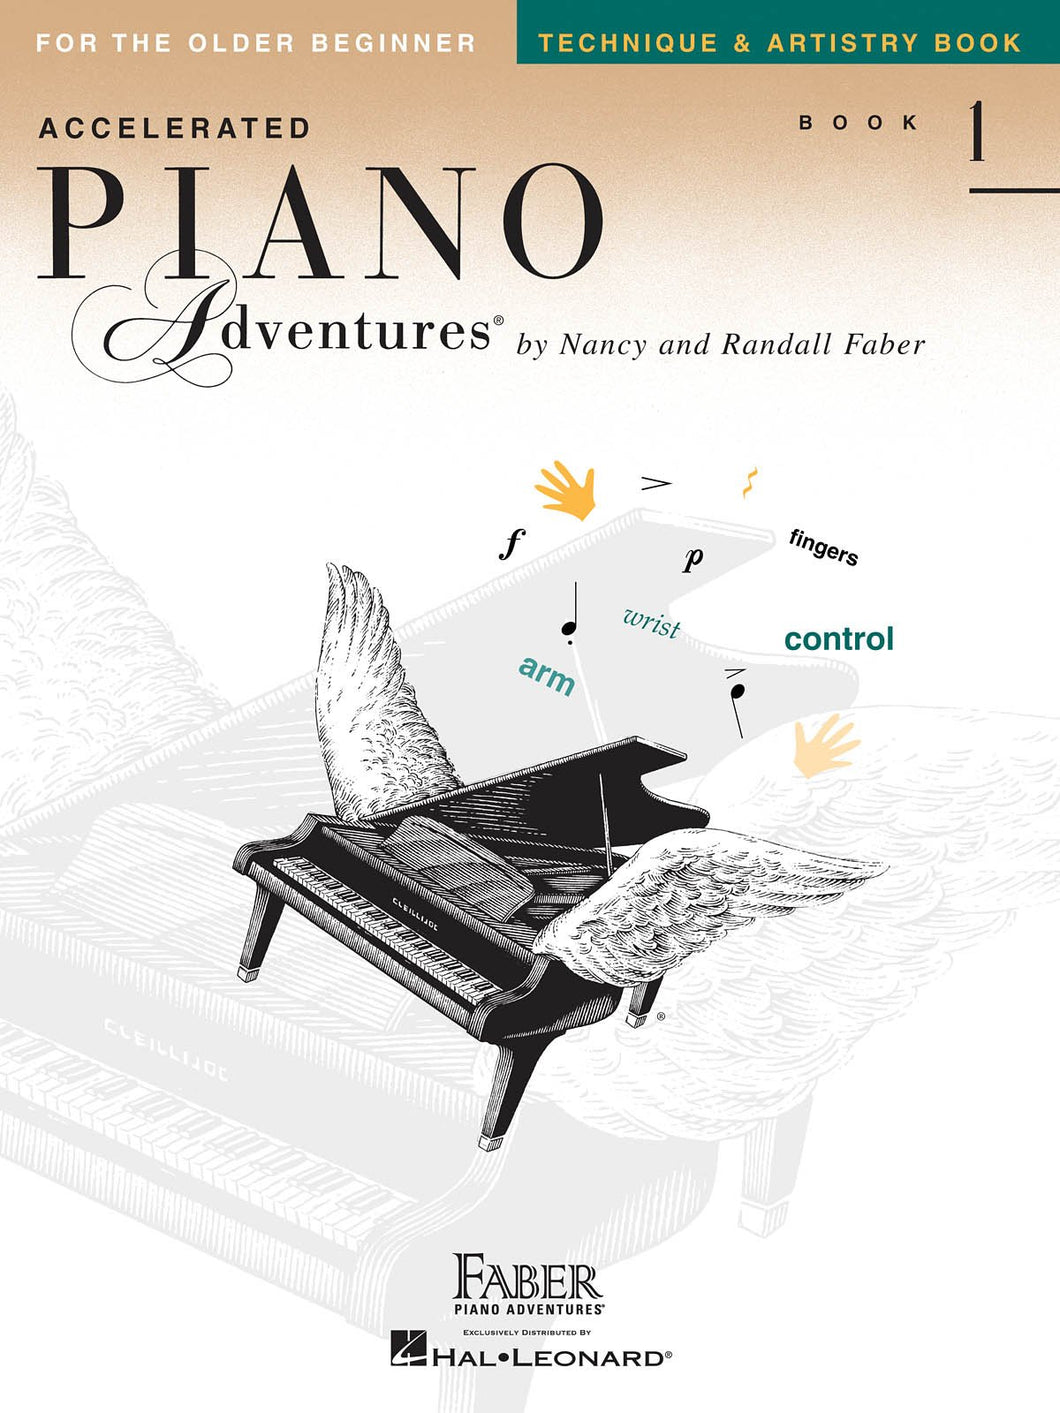 Faber Accelerated Piano Adventures for the Older Beginner Technique & Artistry 1